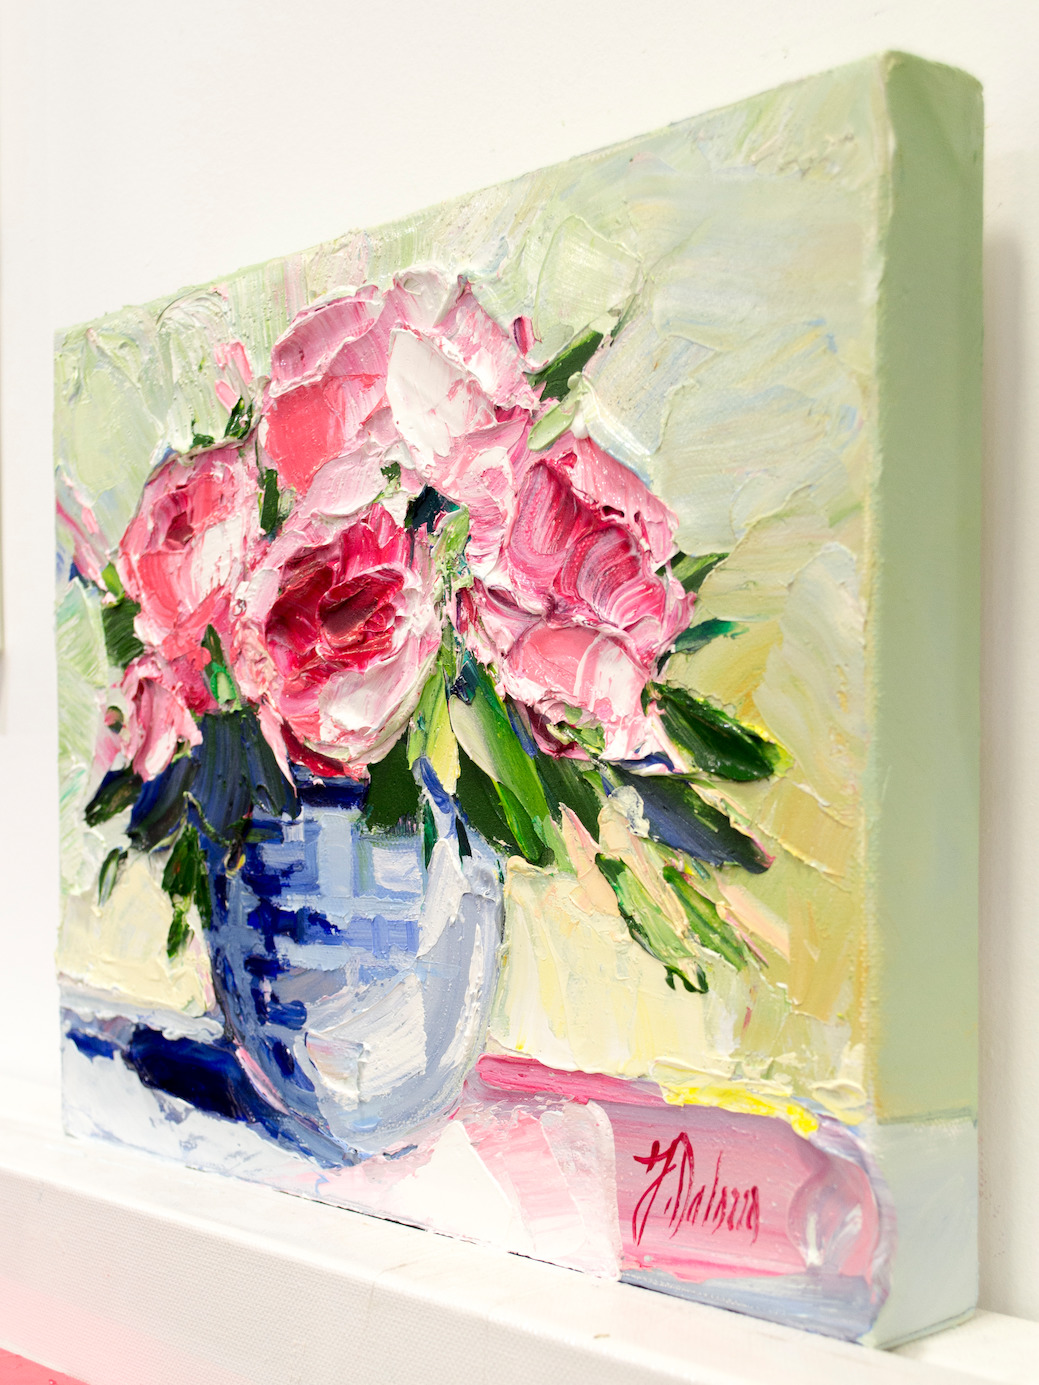 Right View Of Still Life Painting "Peonies in Ginger Jar" By Judith Dalozzo